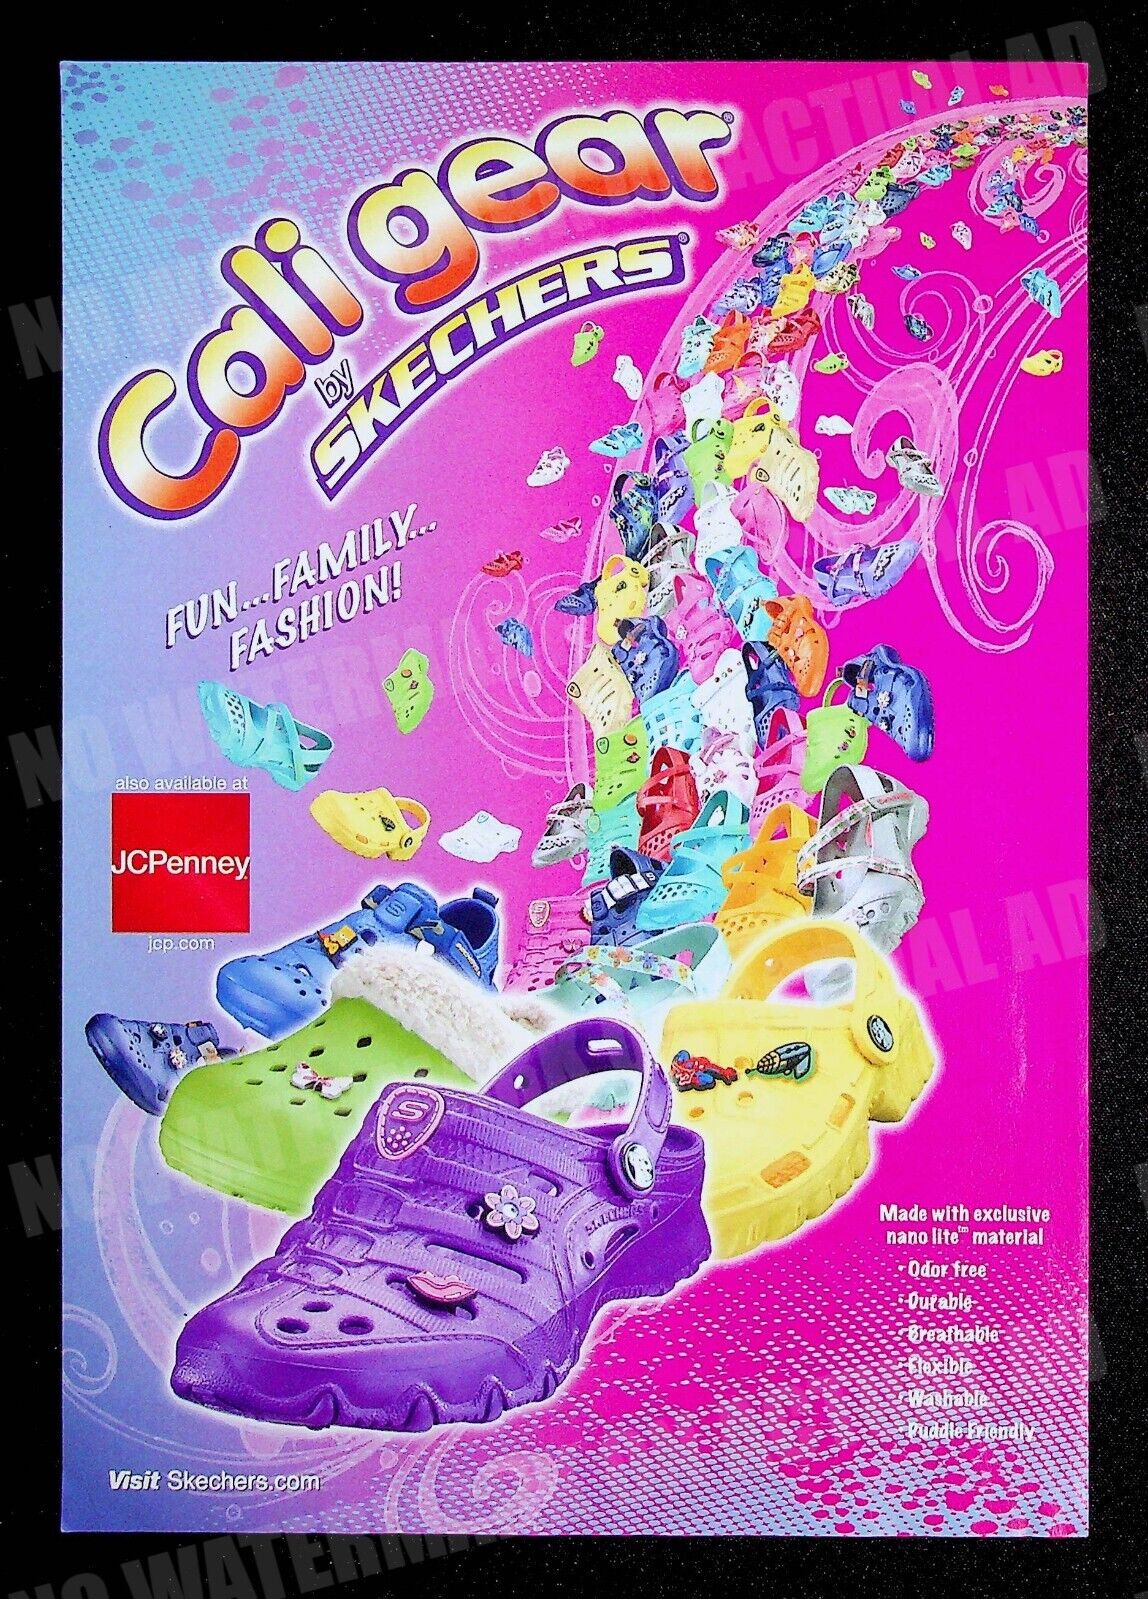 Cali Gear by Skechers Shoes 2008 JC Penney Trade Print Magazine Ad Poster ADVERT